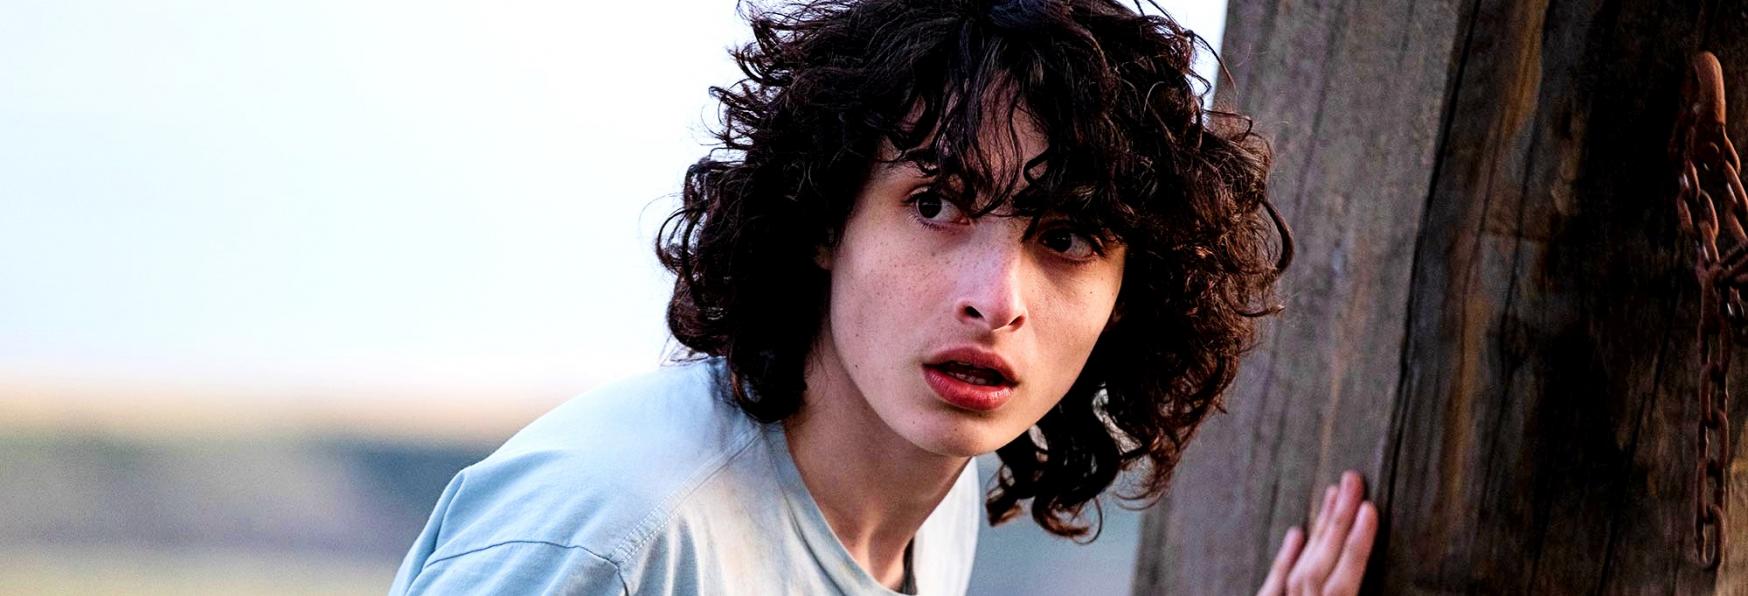 Stranger Things 5: Finn Wolfhard on the Last Season, "We Will Answer Many Questions"